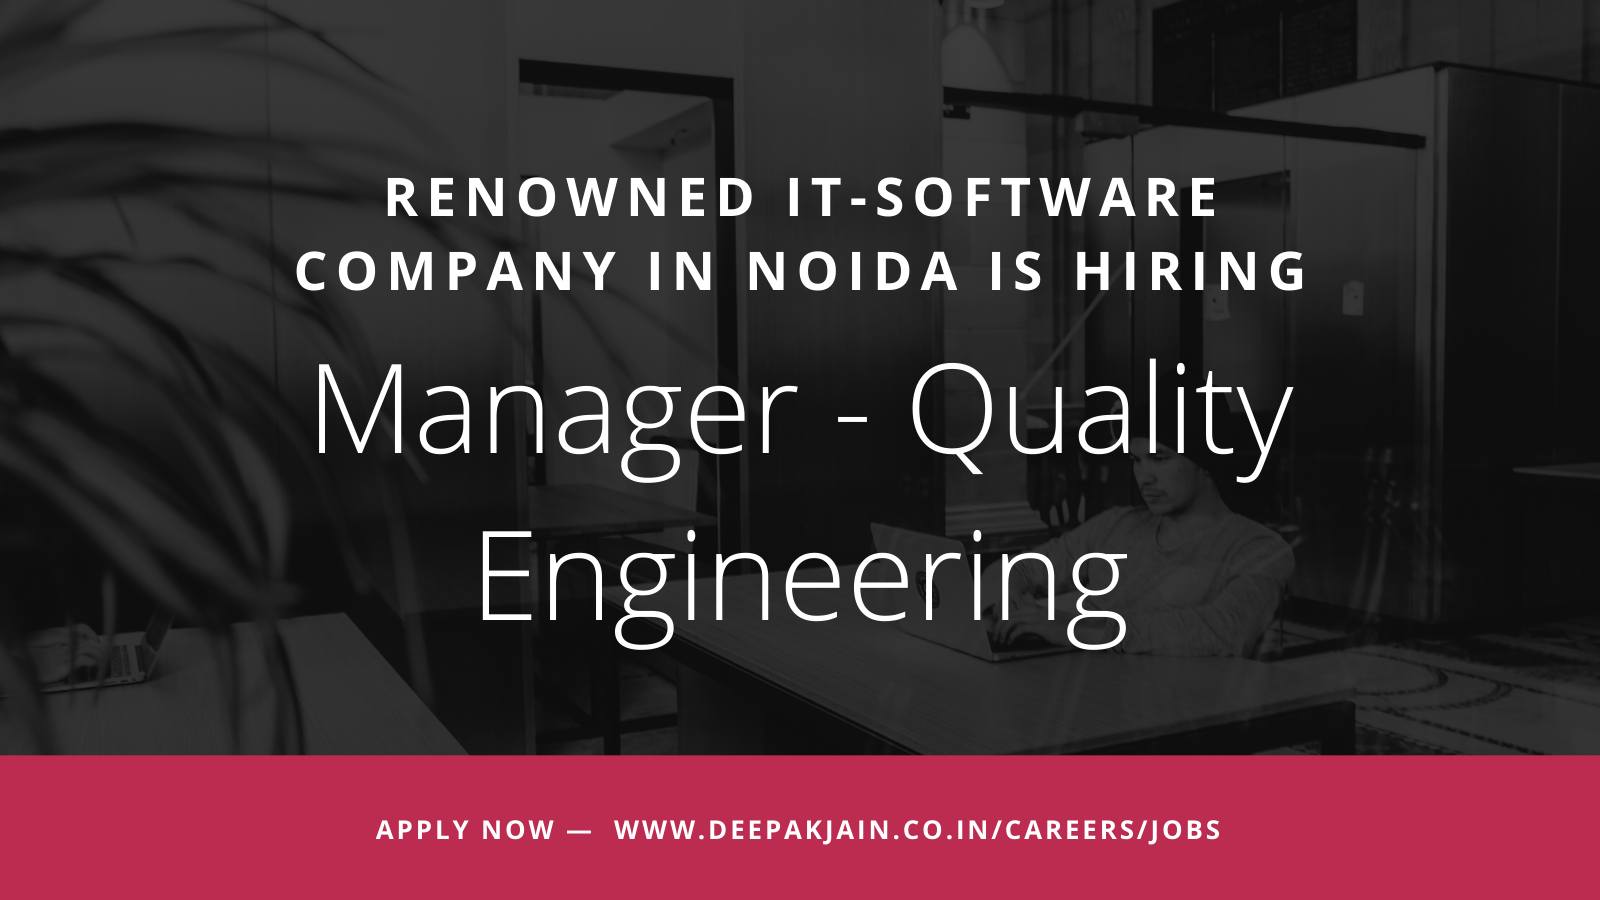 Hiring for Quality Engineering Manager